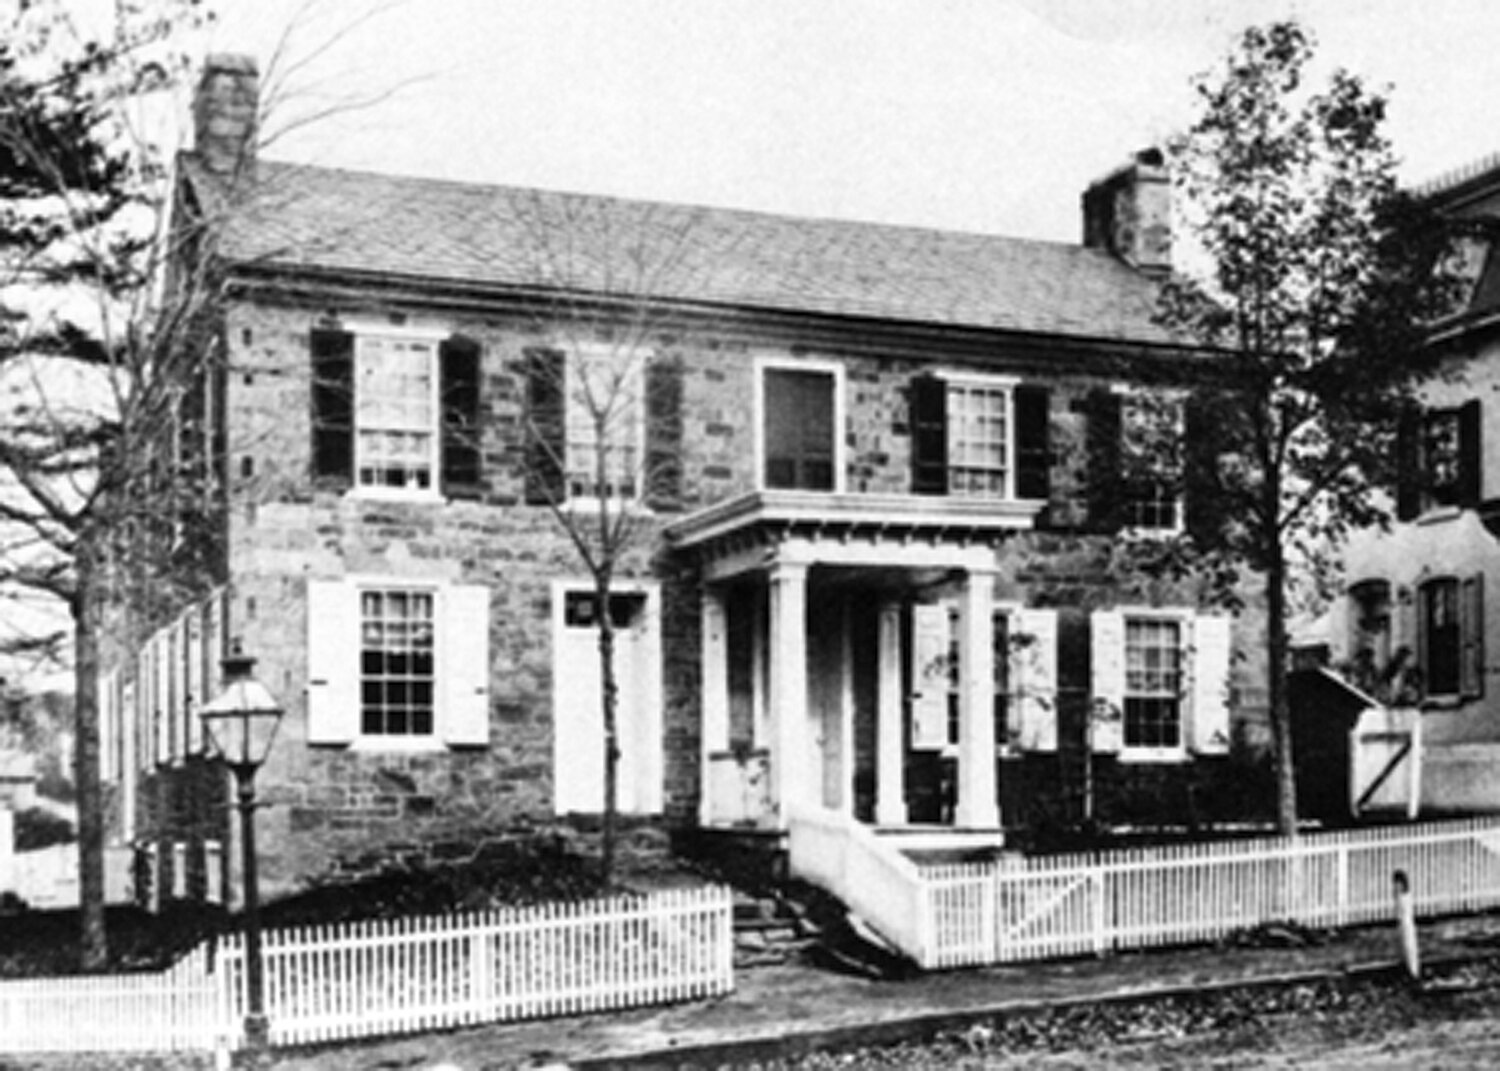 The Green Tree Inn as it appeared in the 1860s.